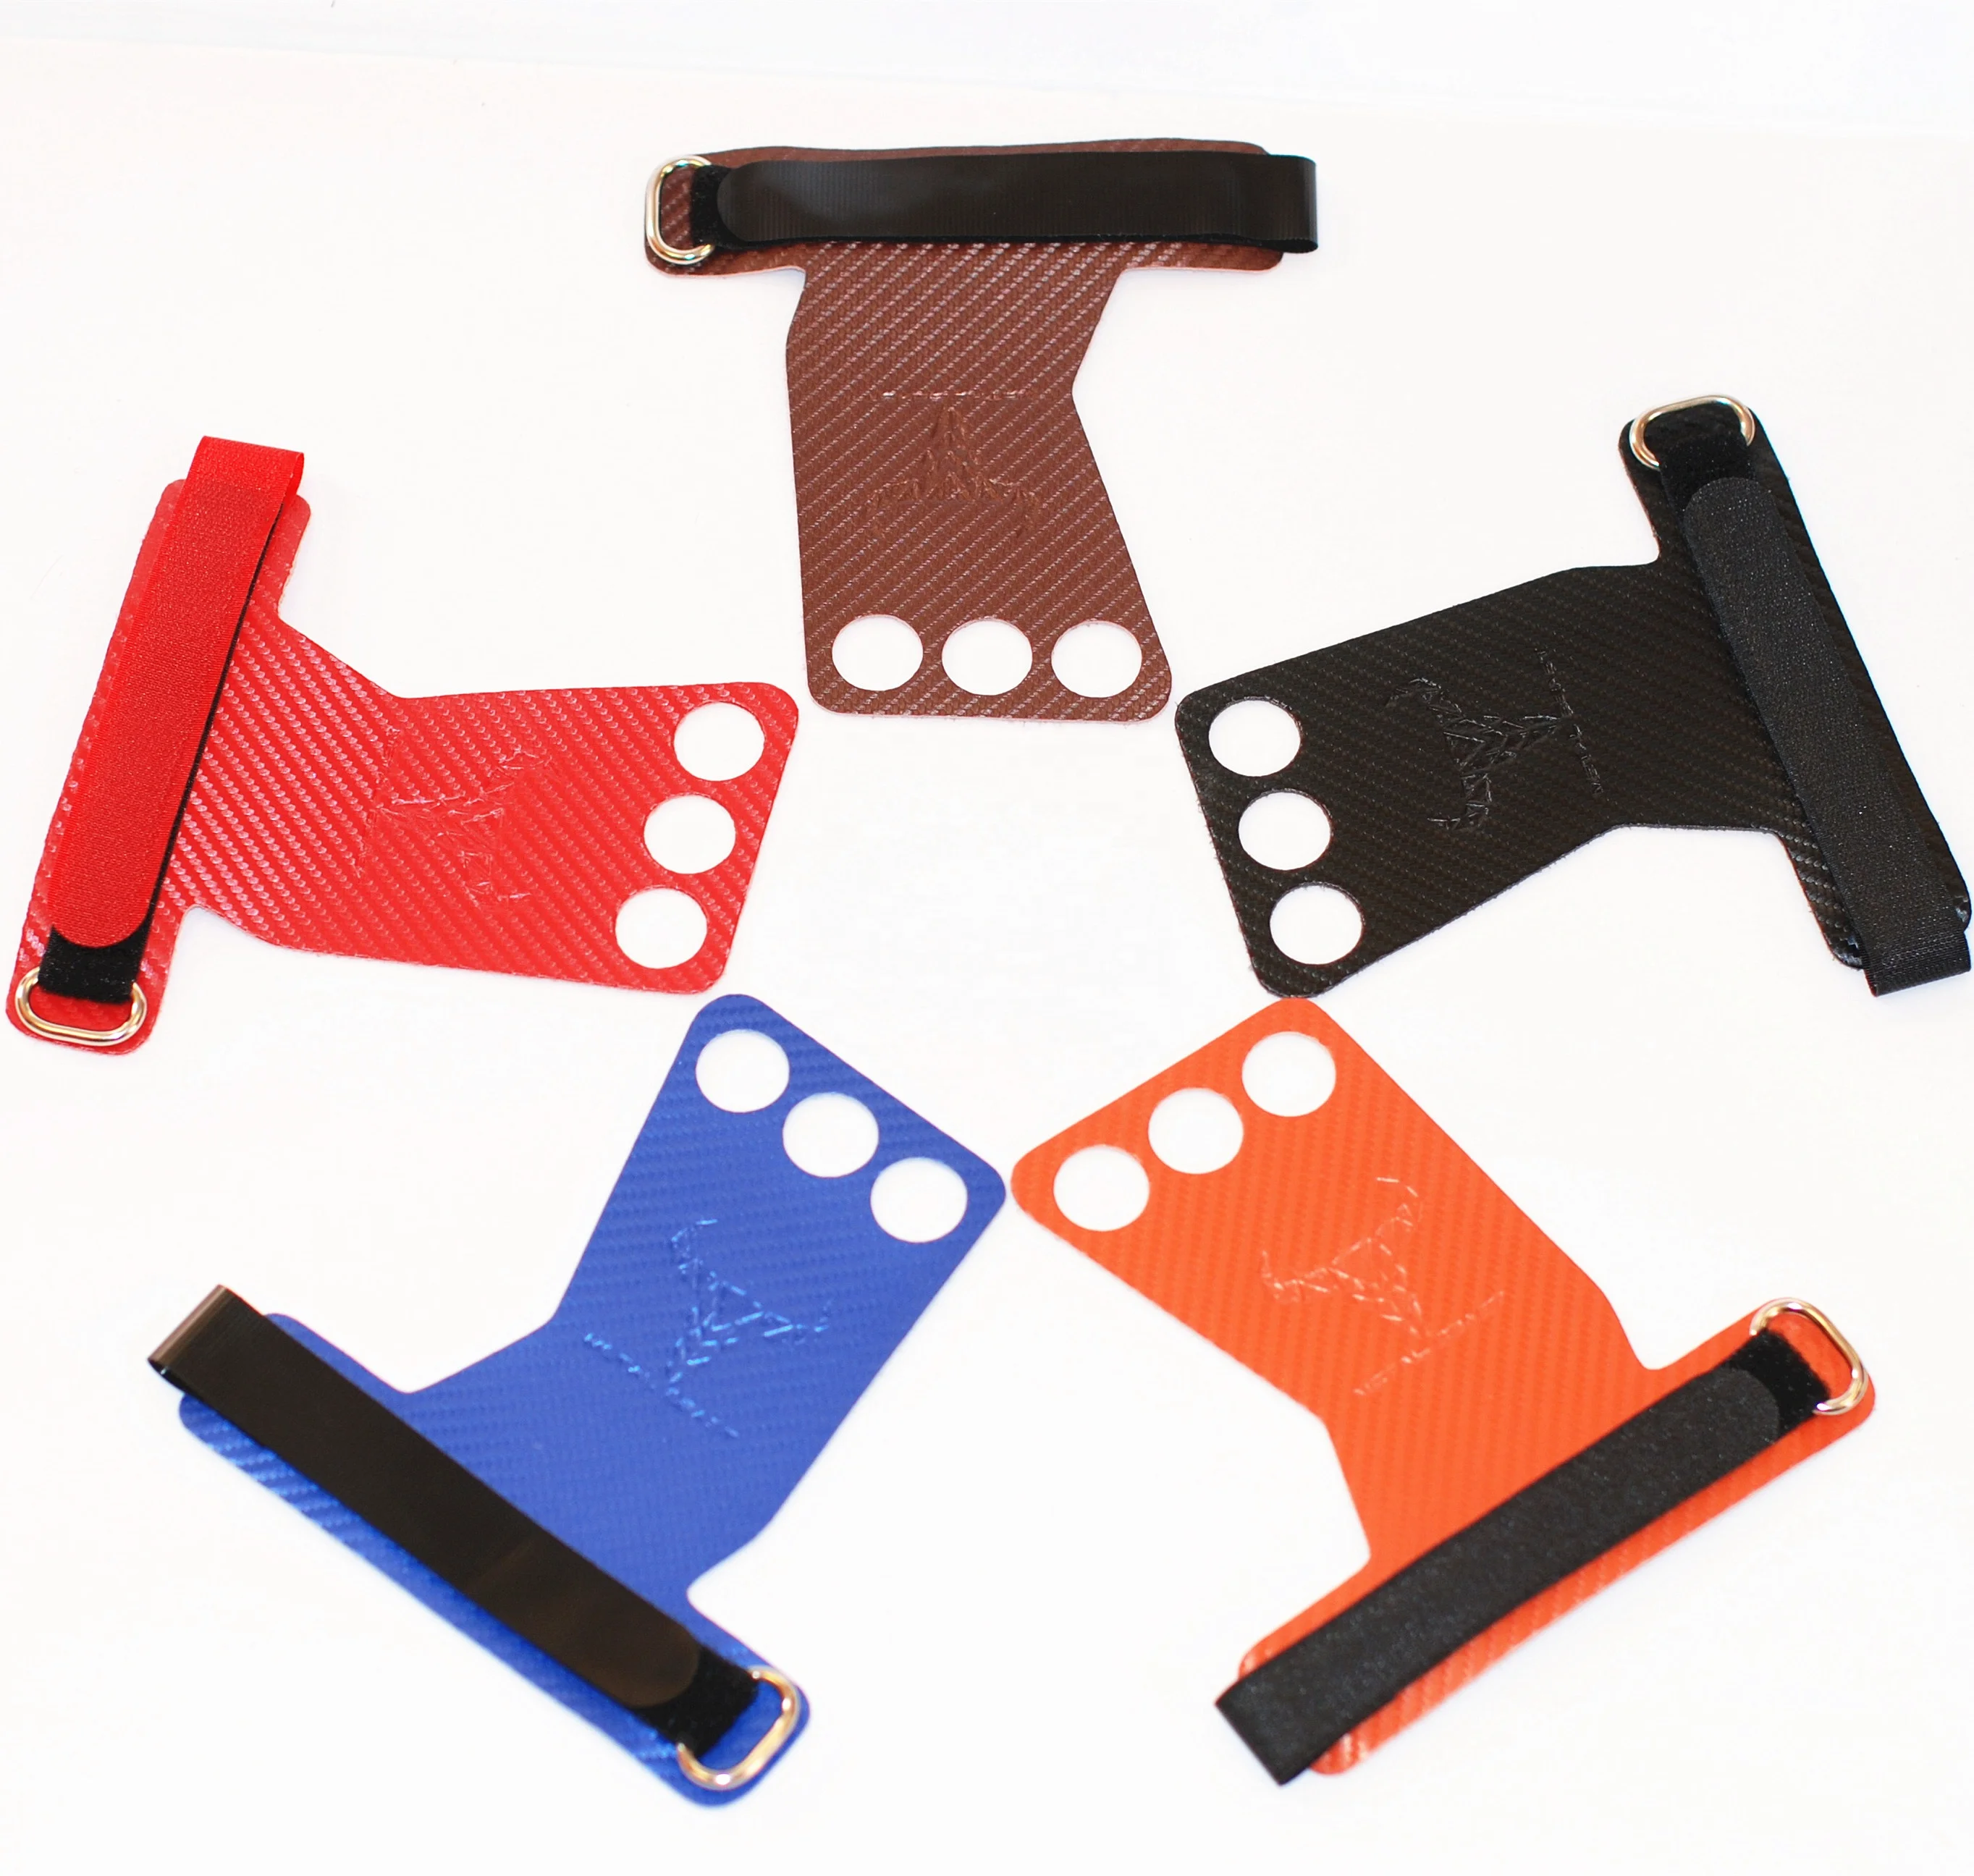 

3 holes carbon fiber leather gymnastics hand grips for Weightlifting, cross Training,Gym, Fitness, Black,red,orange,brown,blue